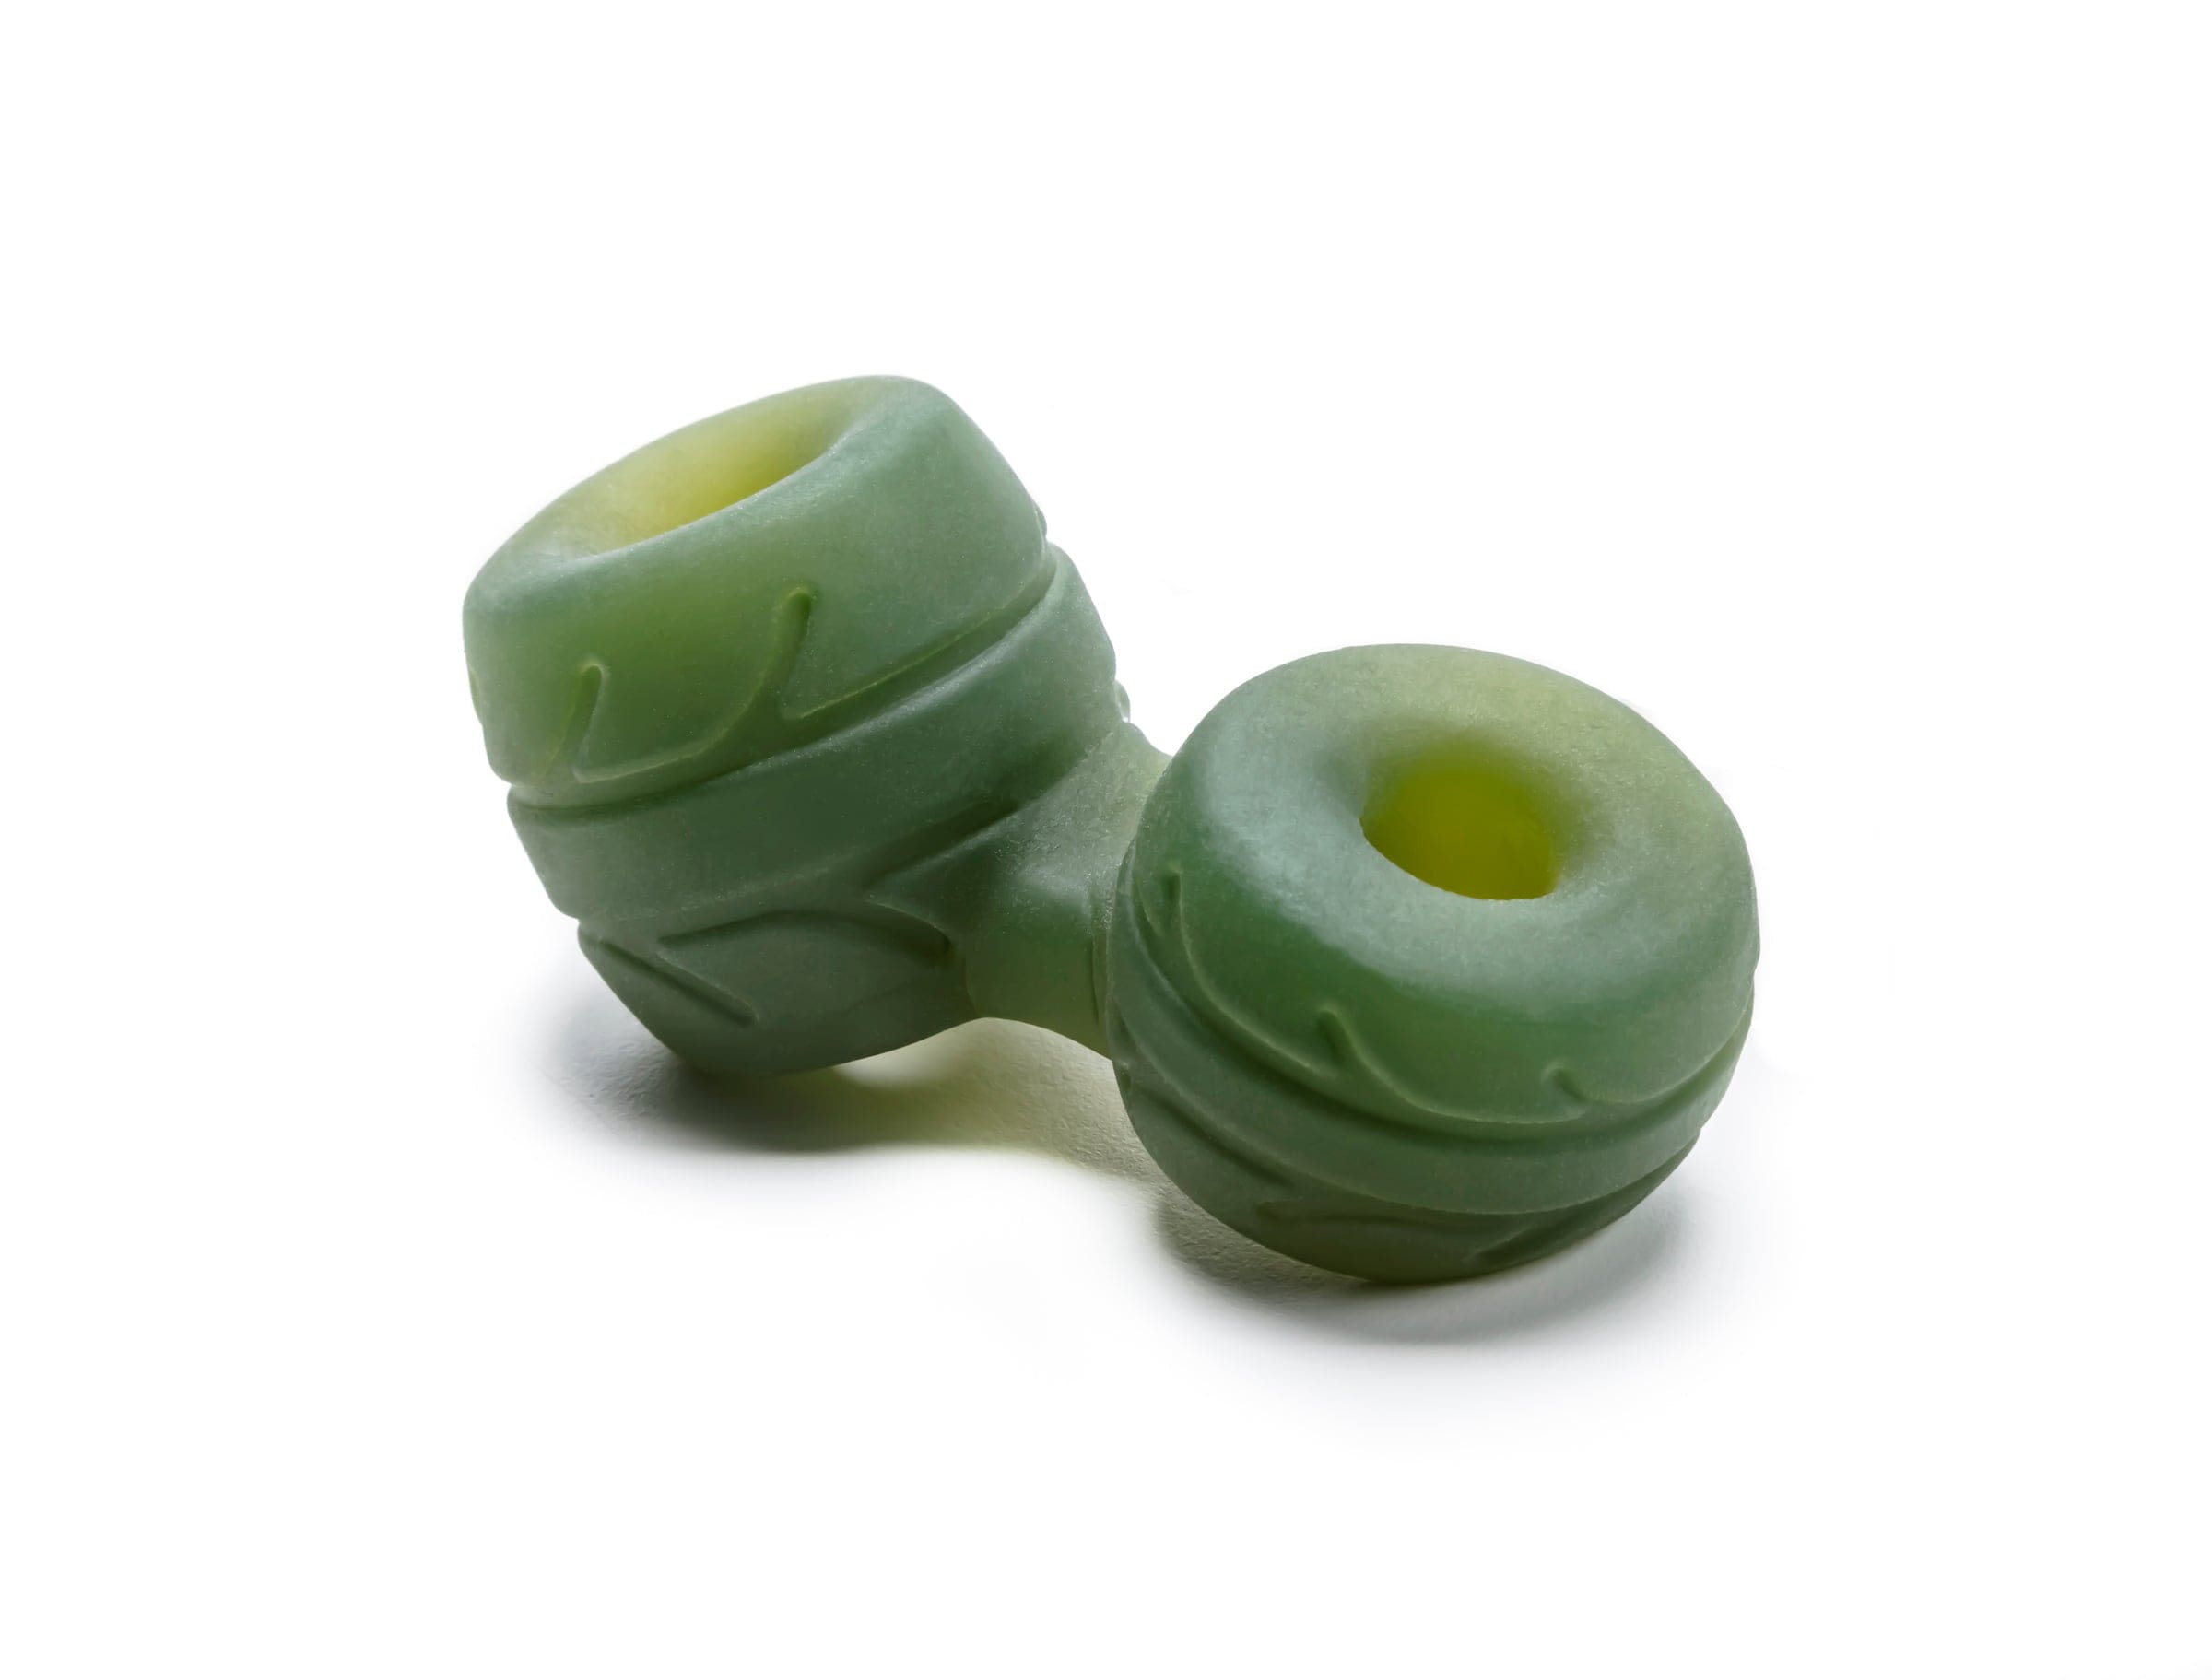 PerfectFit Adult Toys Green SilaSkin Cock And Ball Green 854854005908